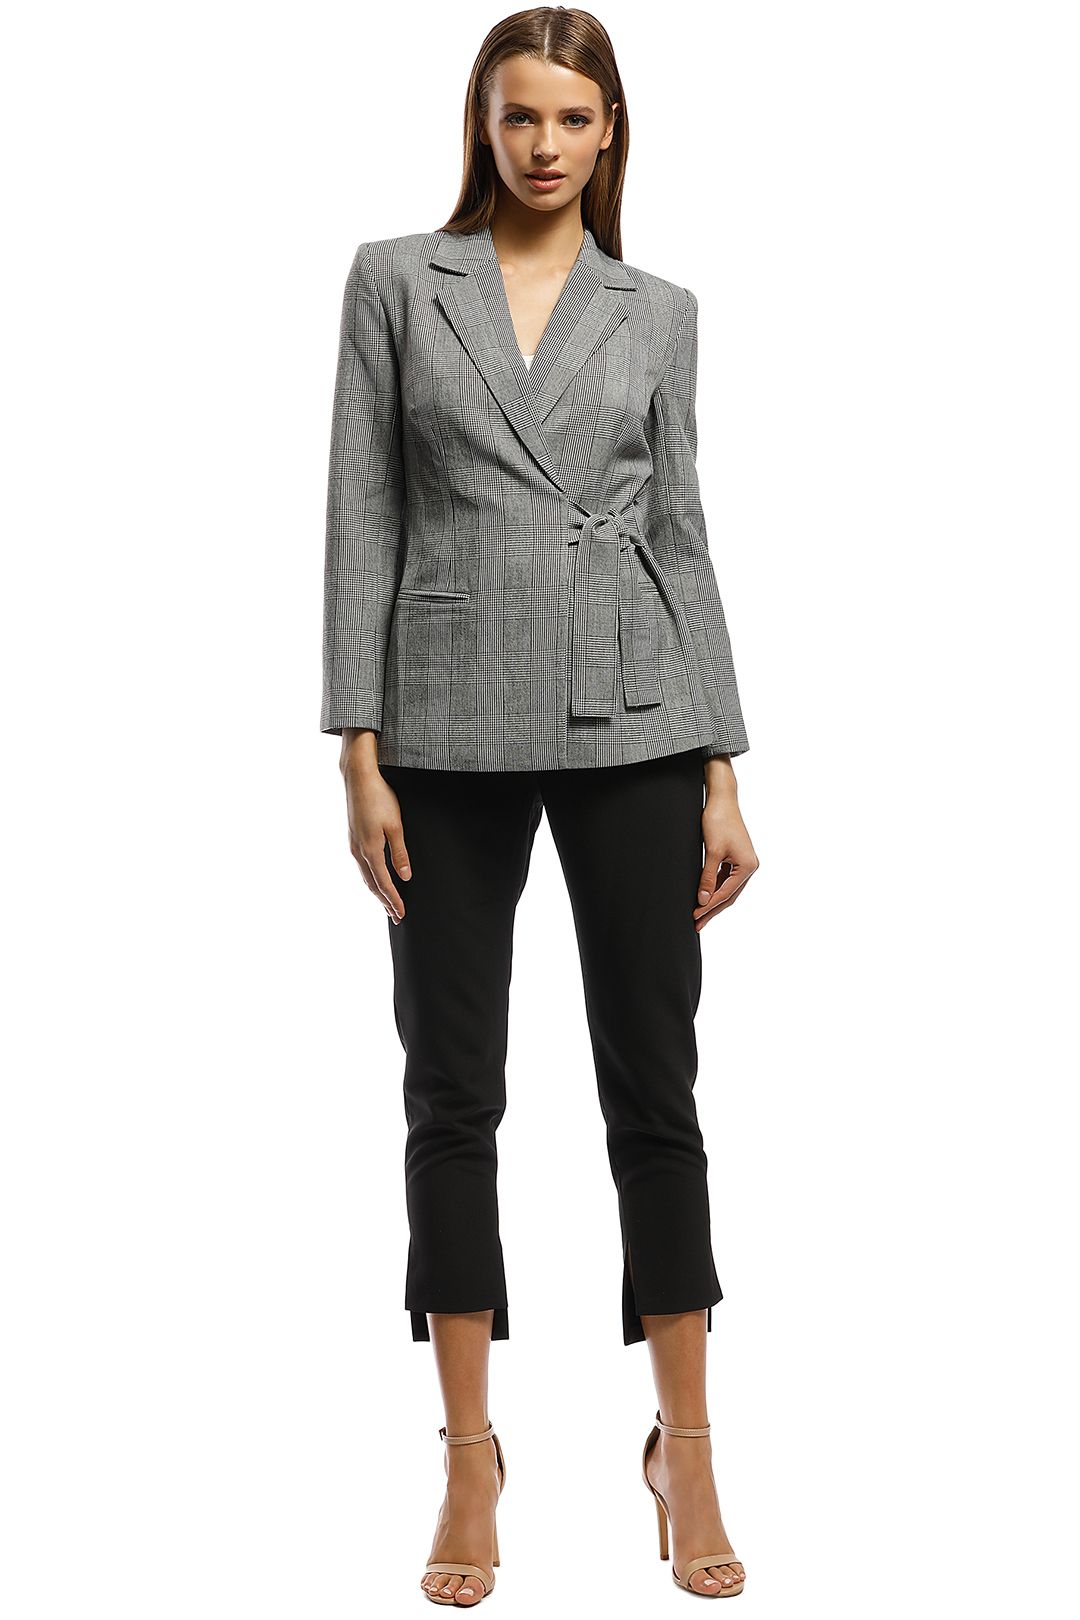 Grace Willow - Hilaria Jacket - Grey - Front